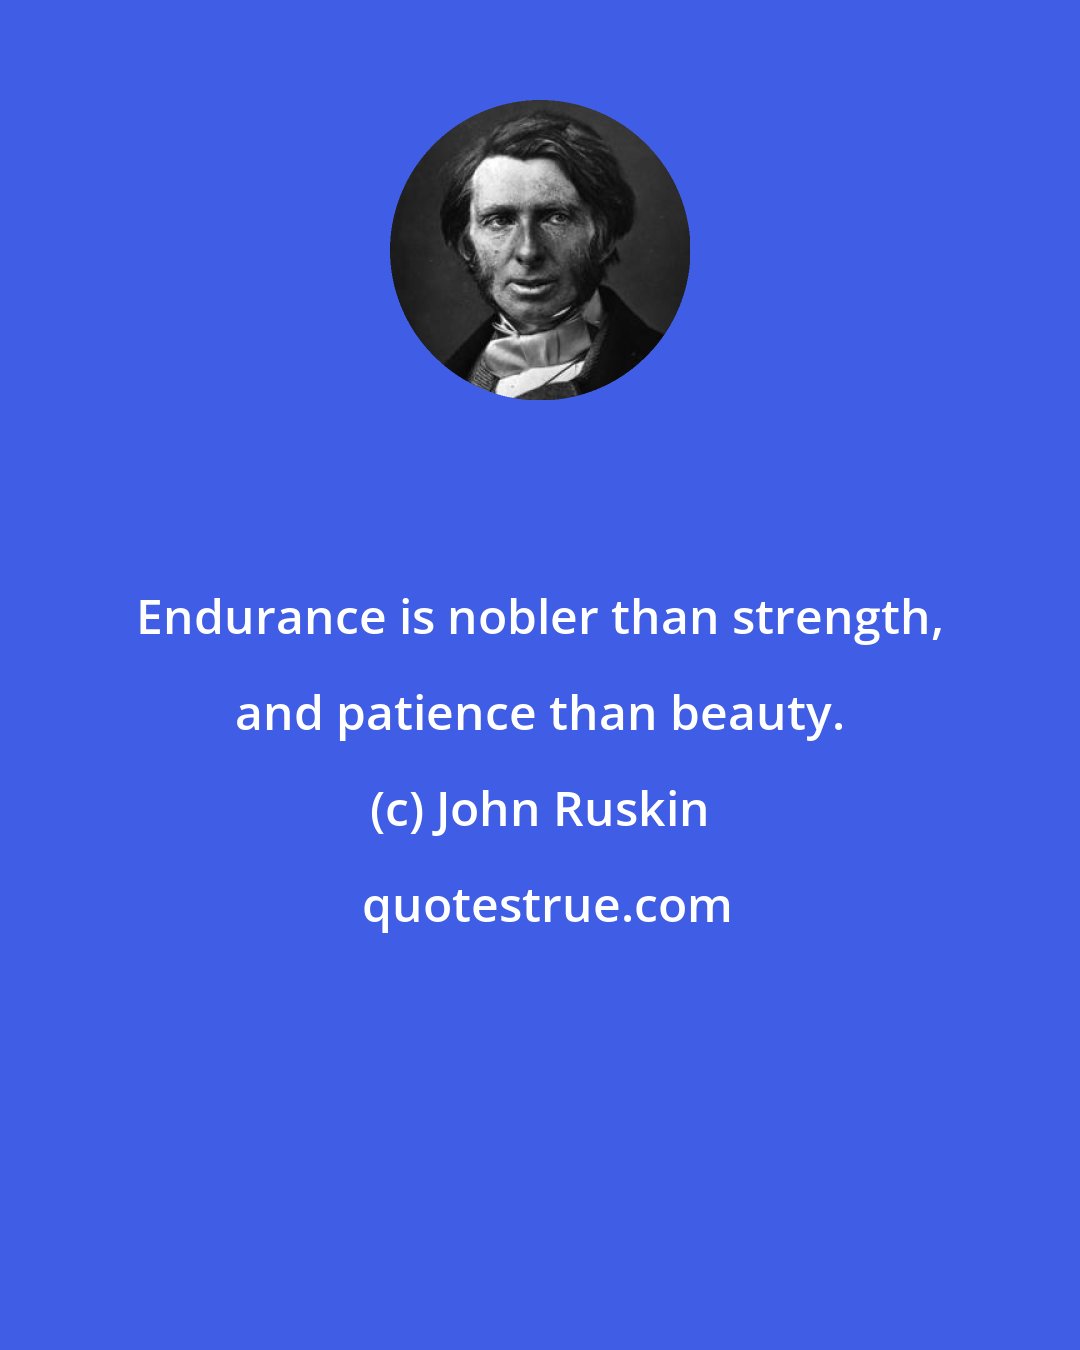 John Ruskin: Endurance is nobler than strength, and patience than beauty.